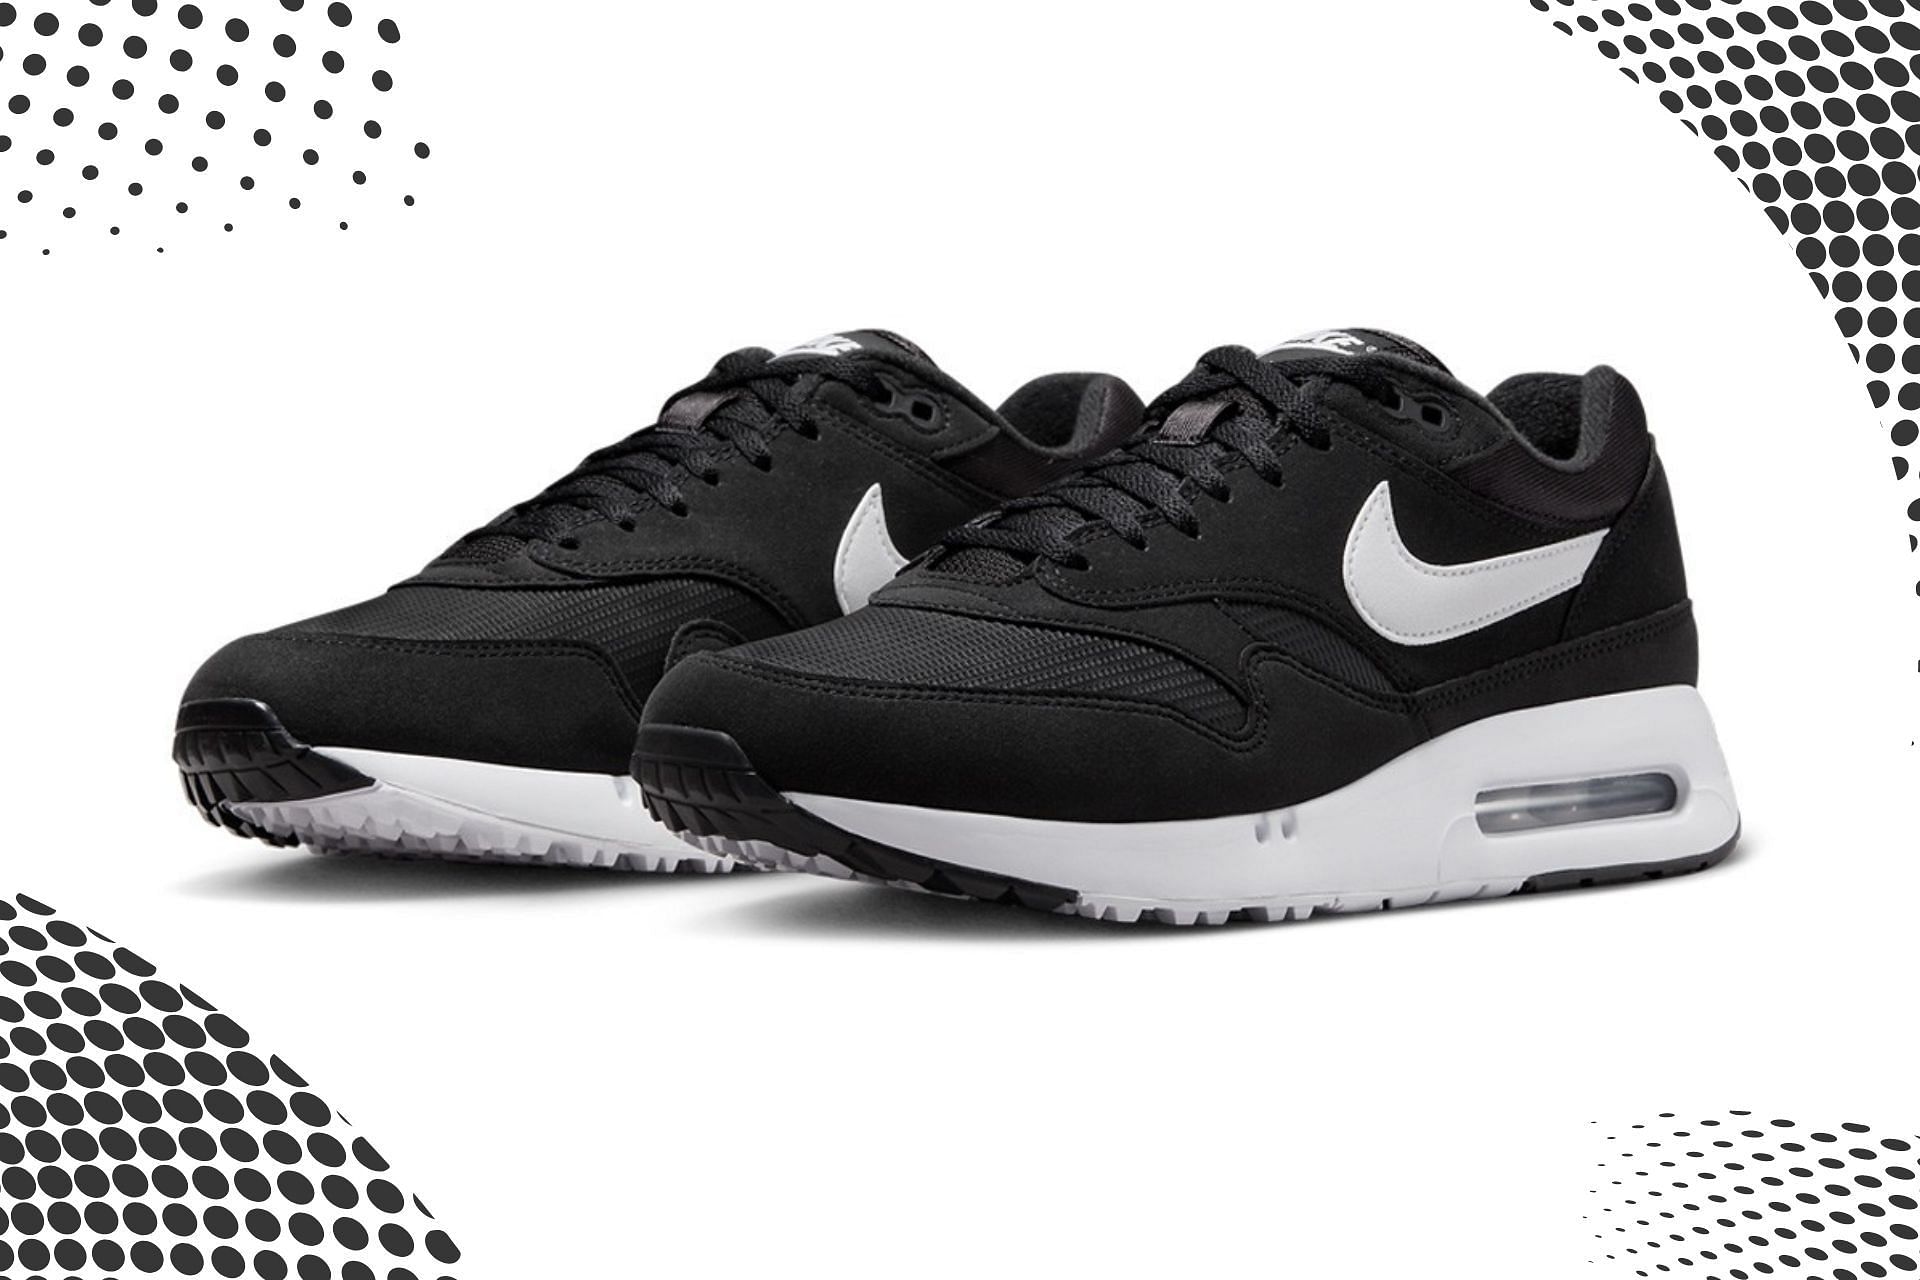 Air Max 1 Golf "Black / White" sneakers: Where to buy and more explored